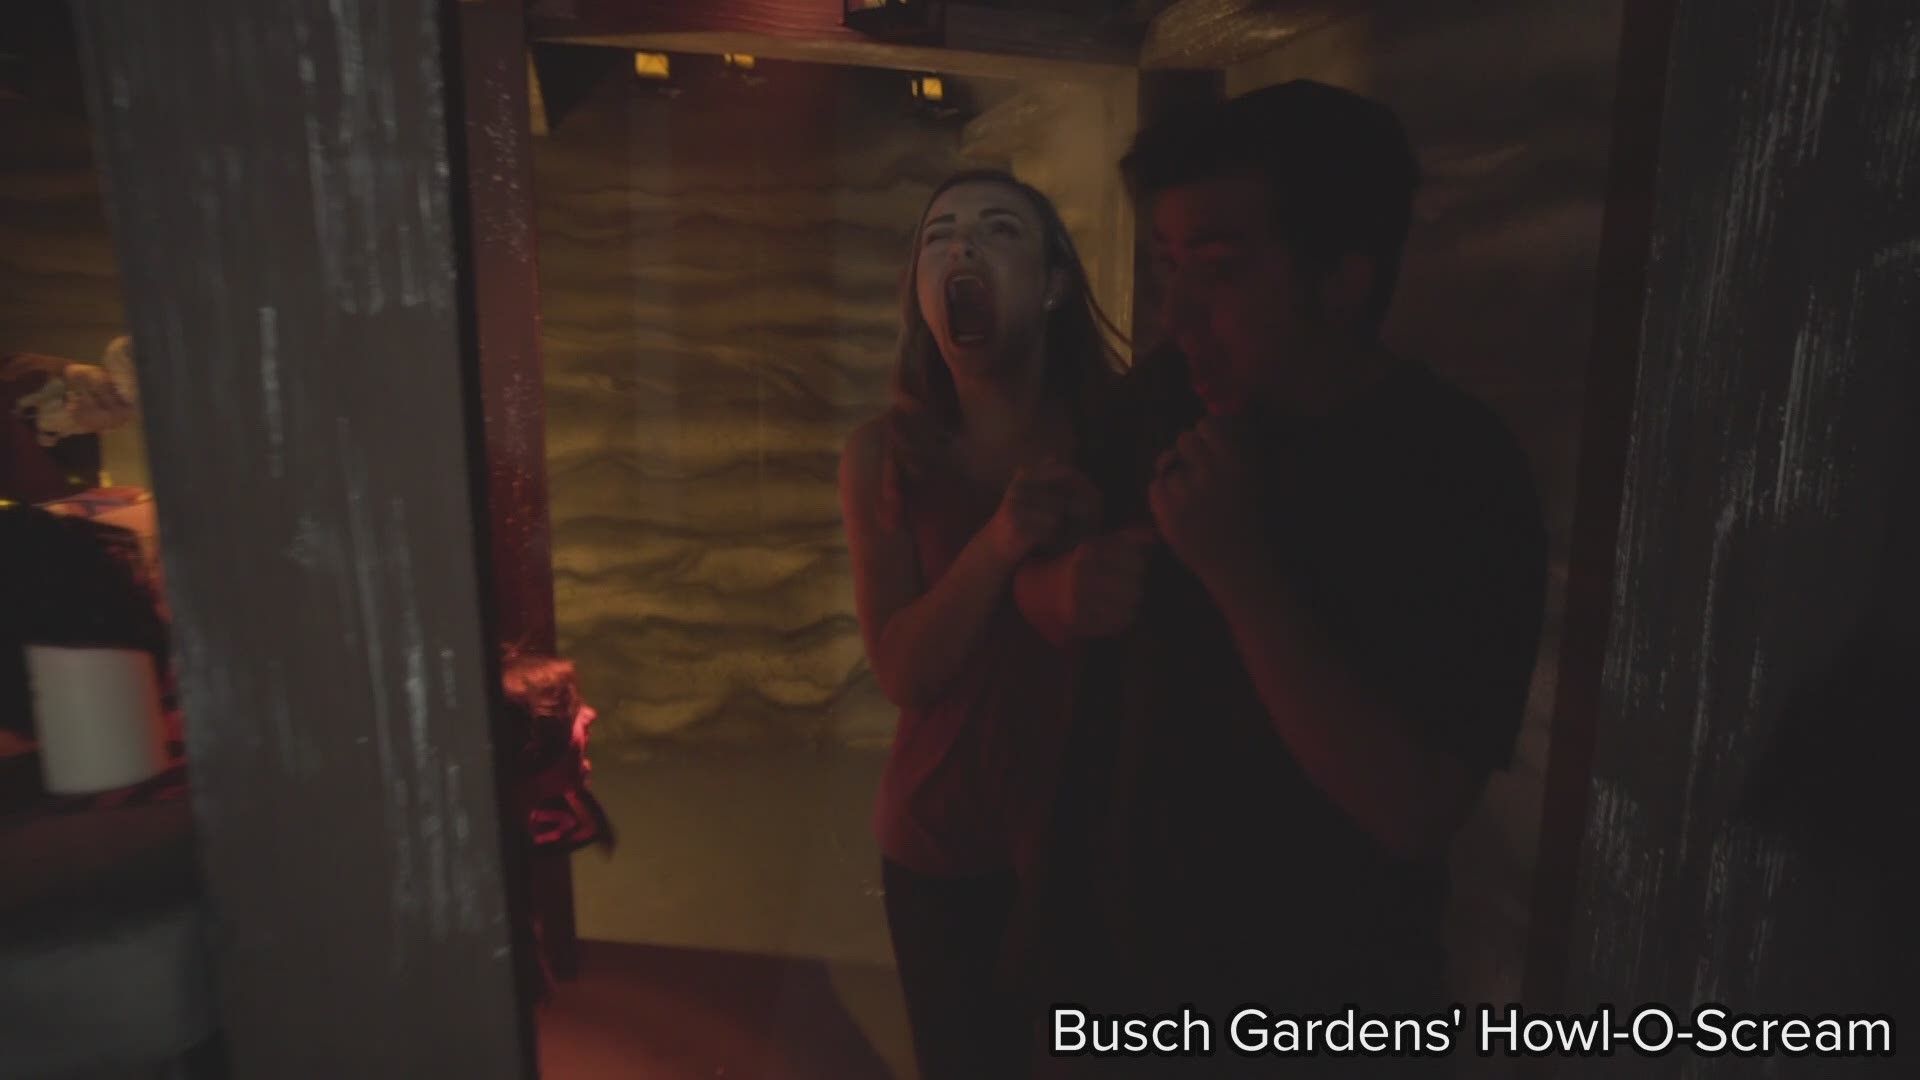 Busch Gardens to hold 'modified' HowlOScream with limited capacity